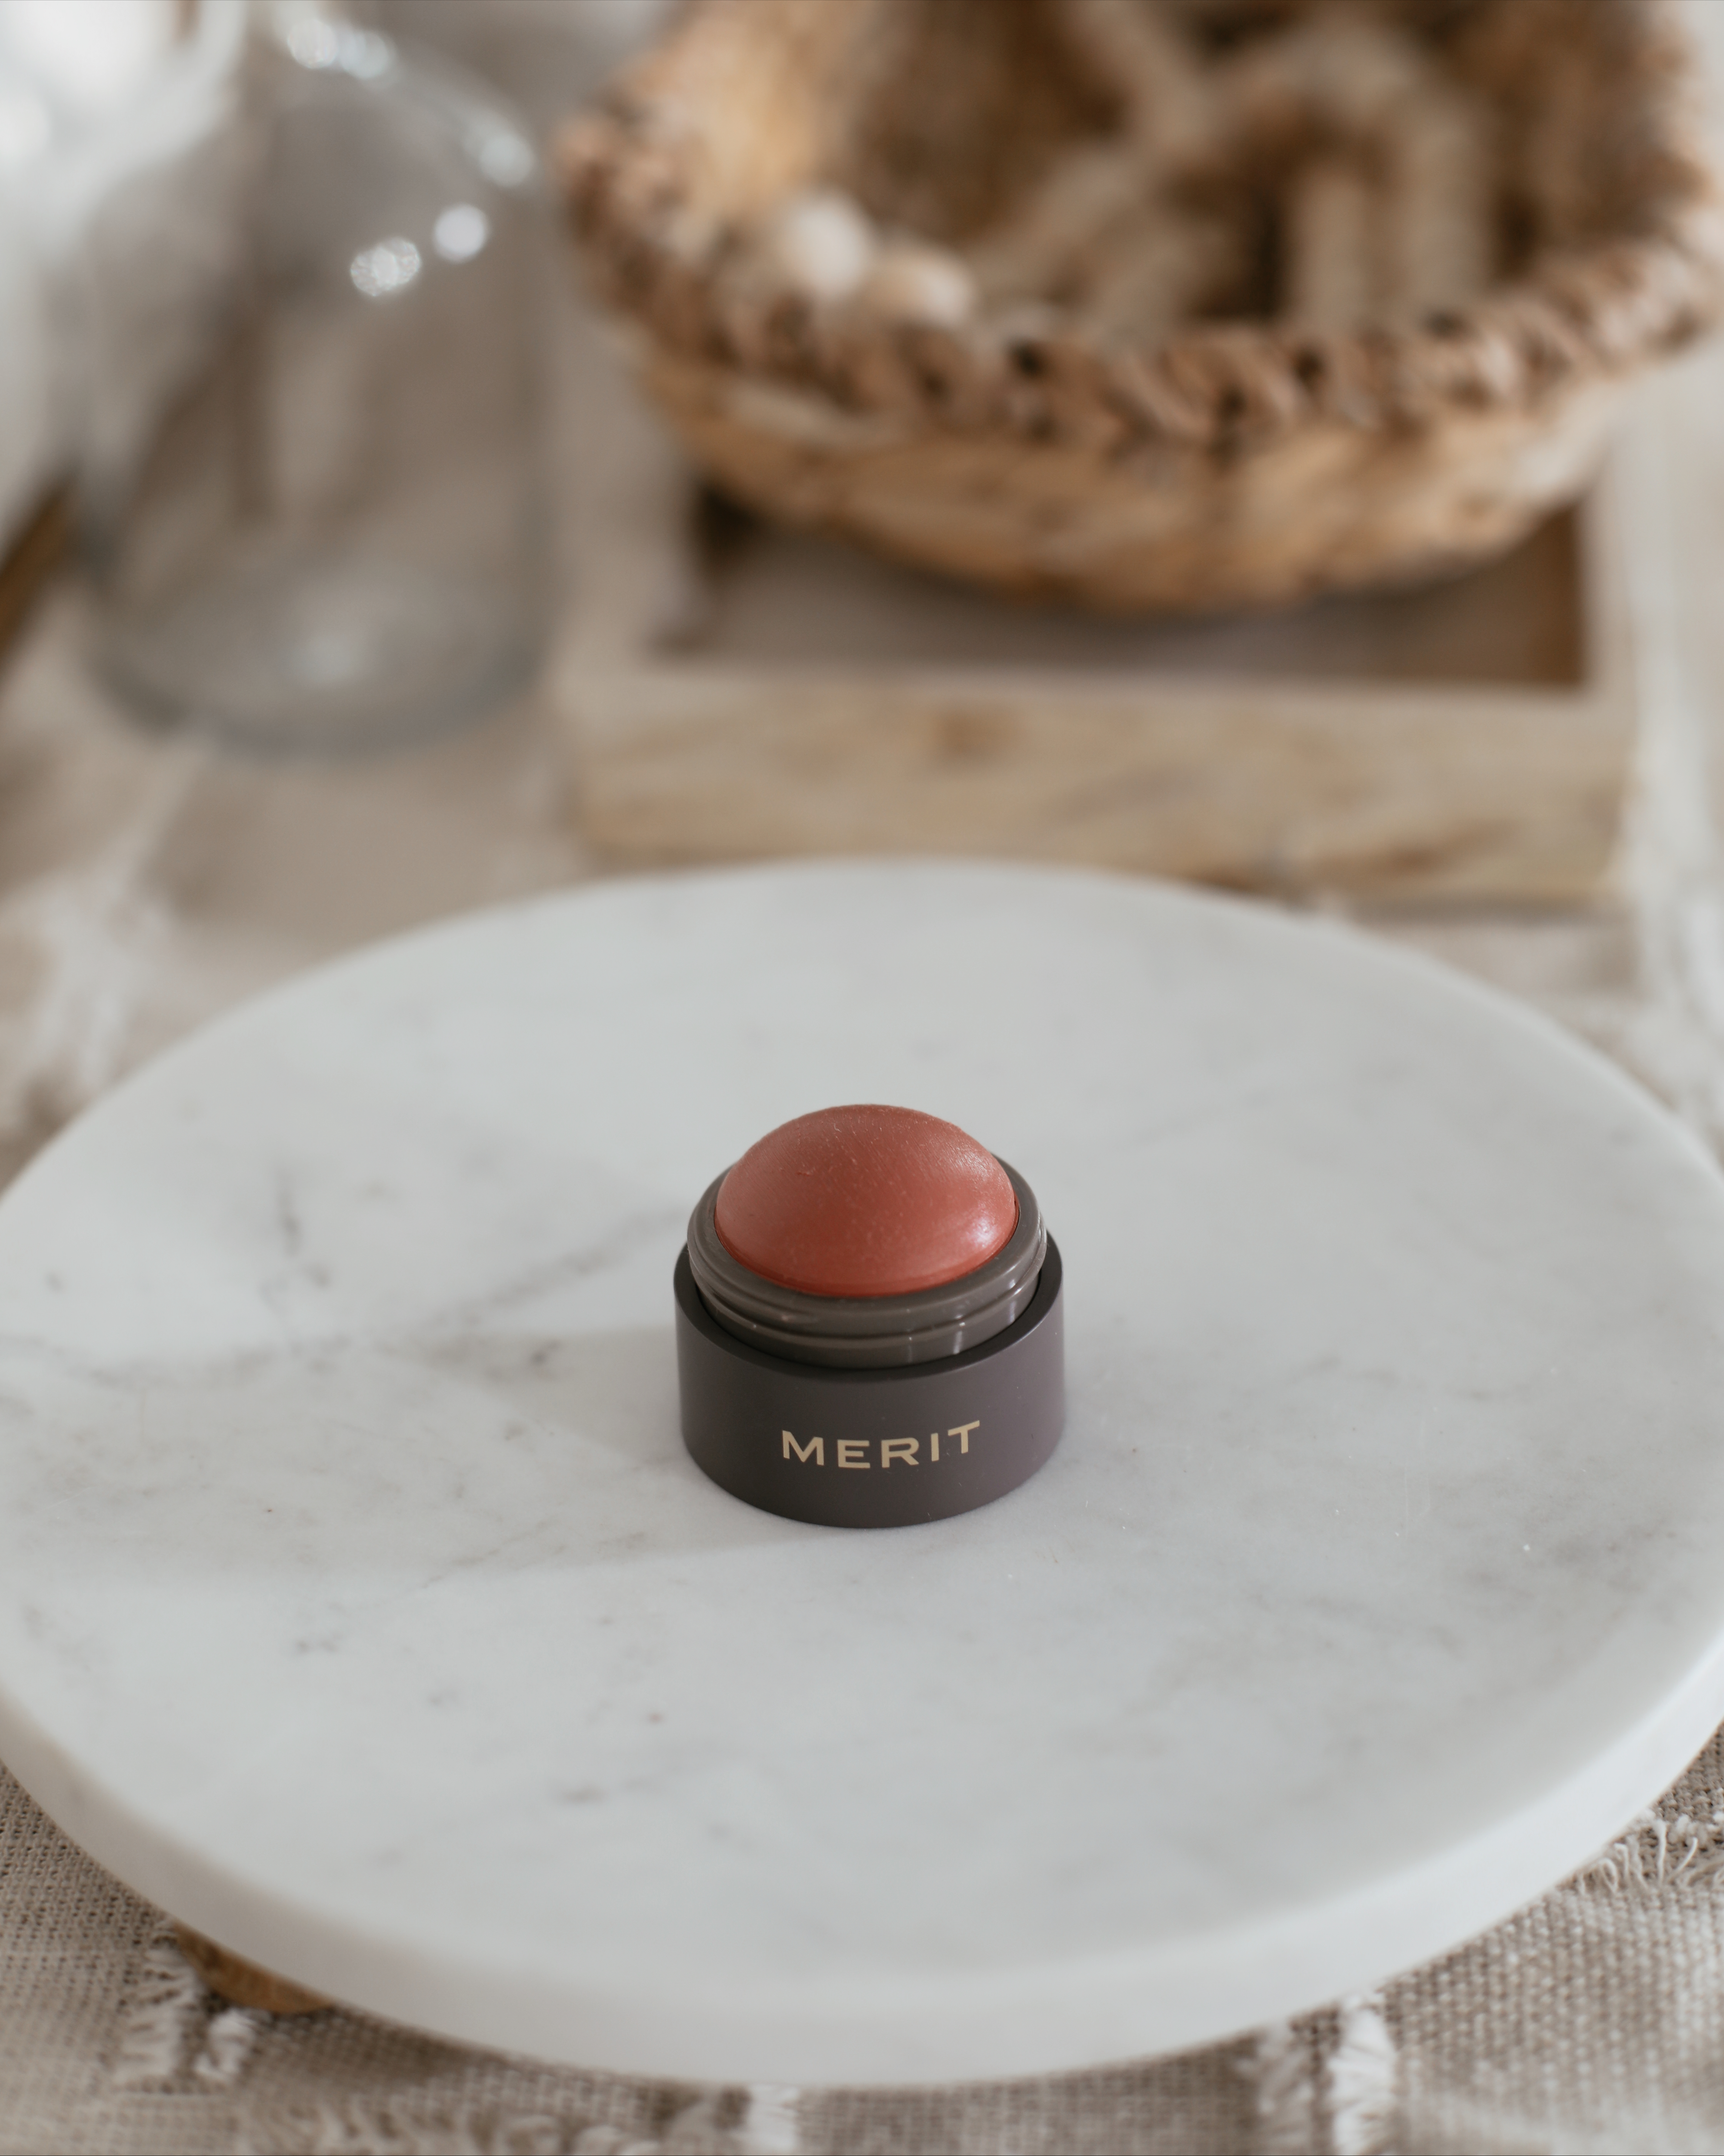 Merit Flush Balm Cream Blush. Sharing my clean beauty makeup routine with products from Merit Beauty.